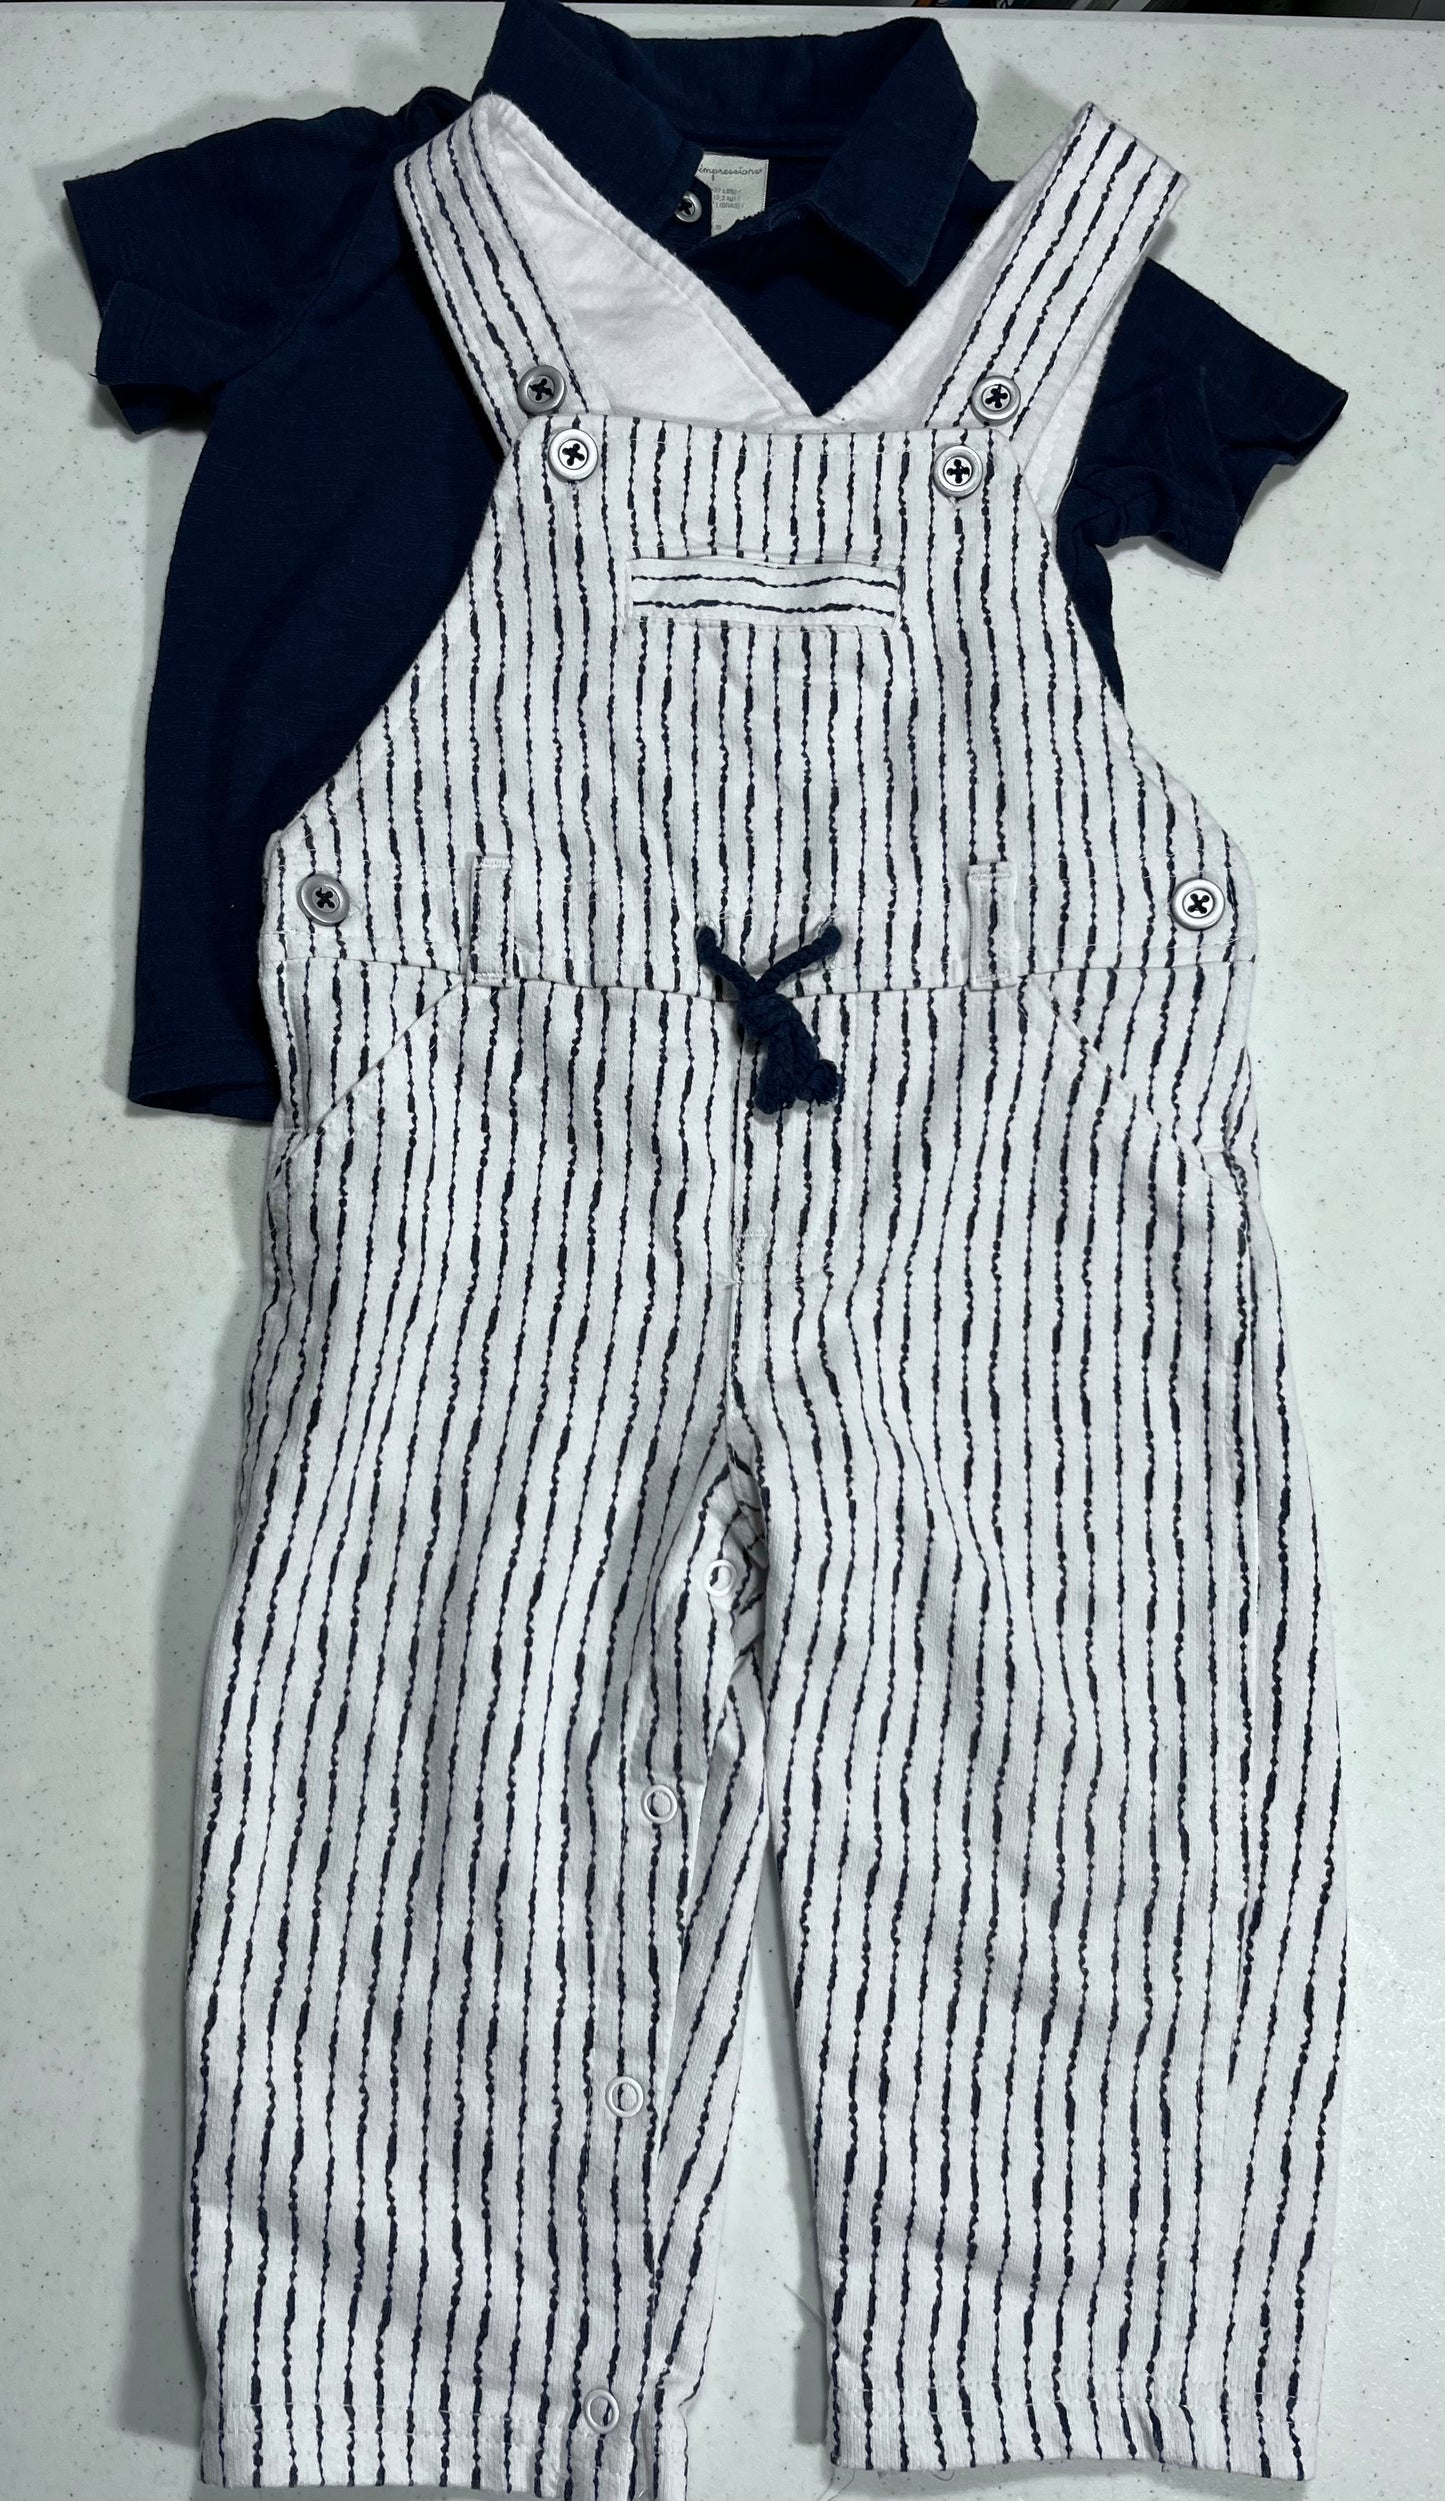 First impressions, 18 months, overalls and polo navy blue